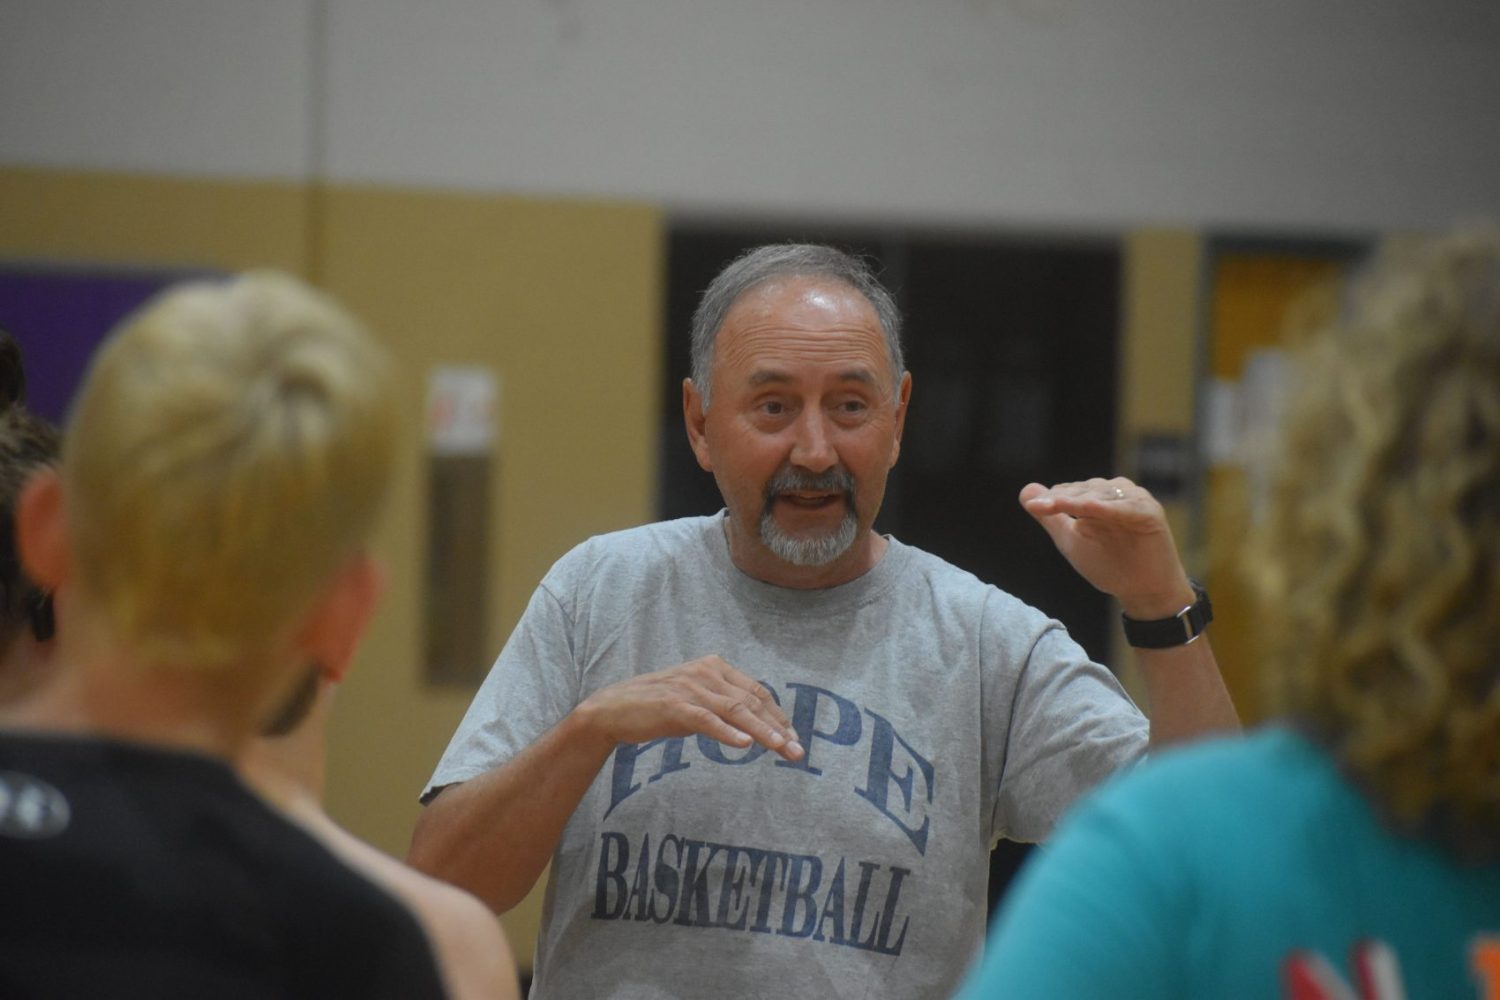 Trio of Shelby alumni lead local youth basketball camp